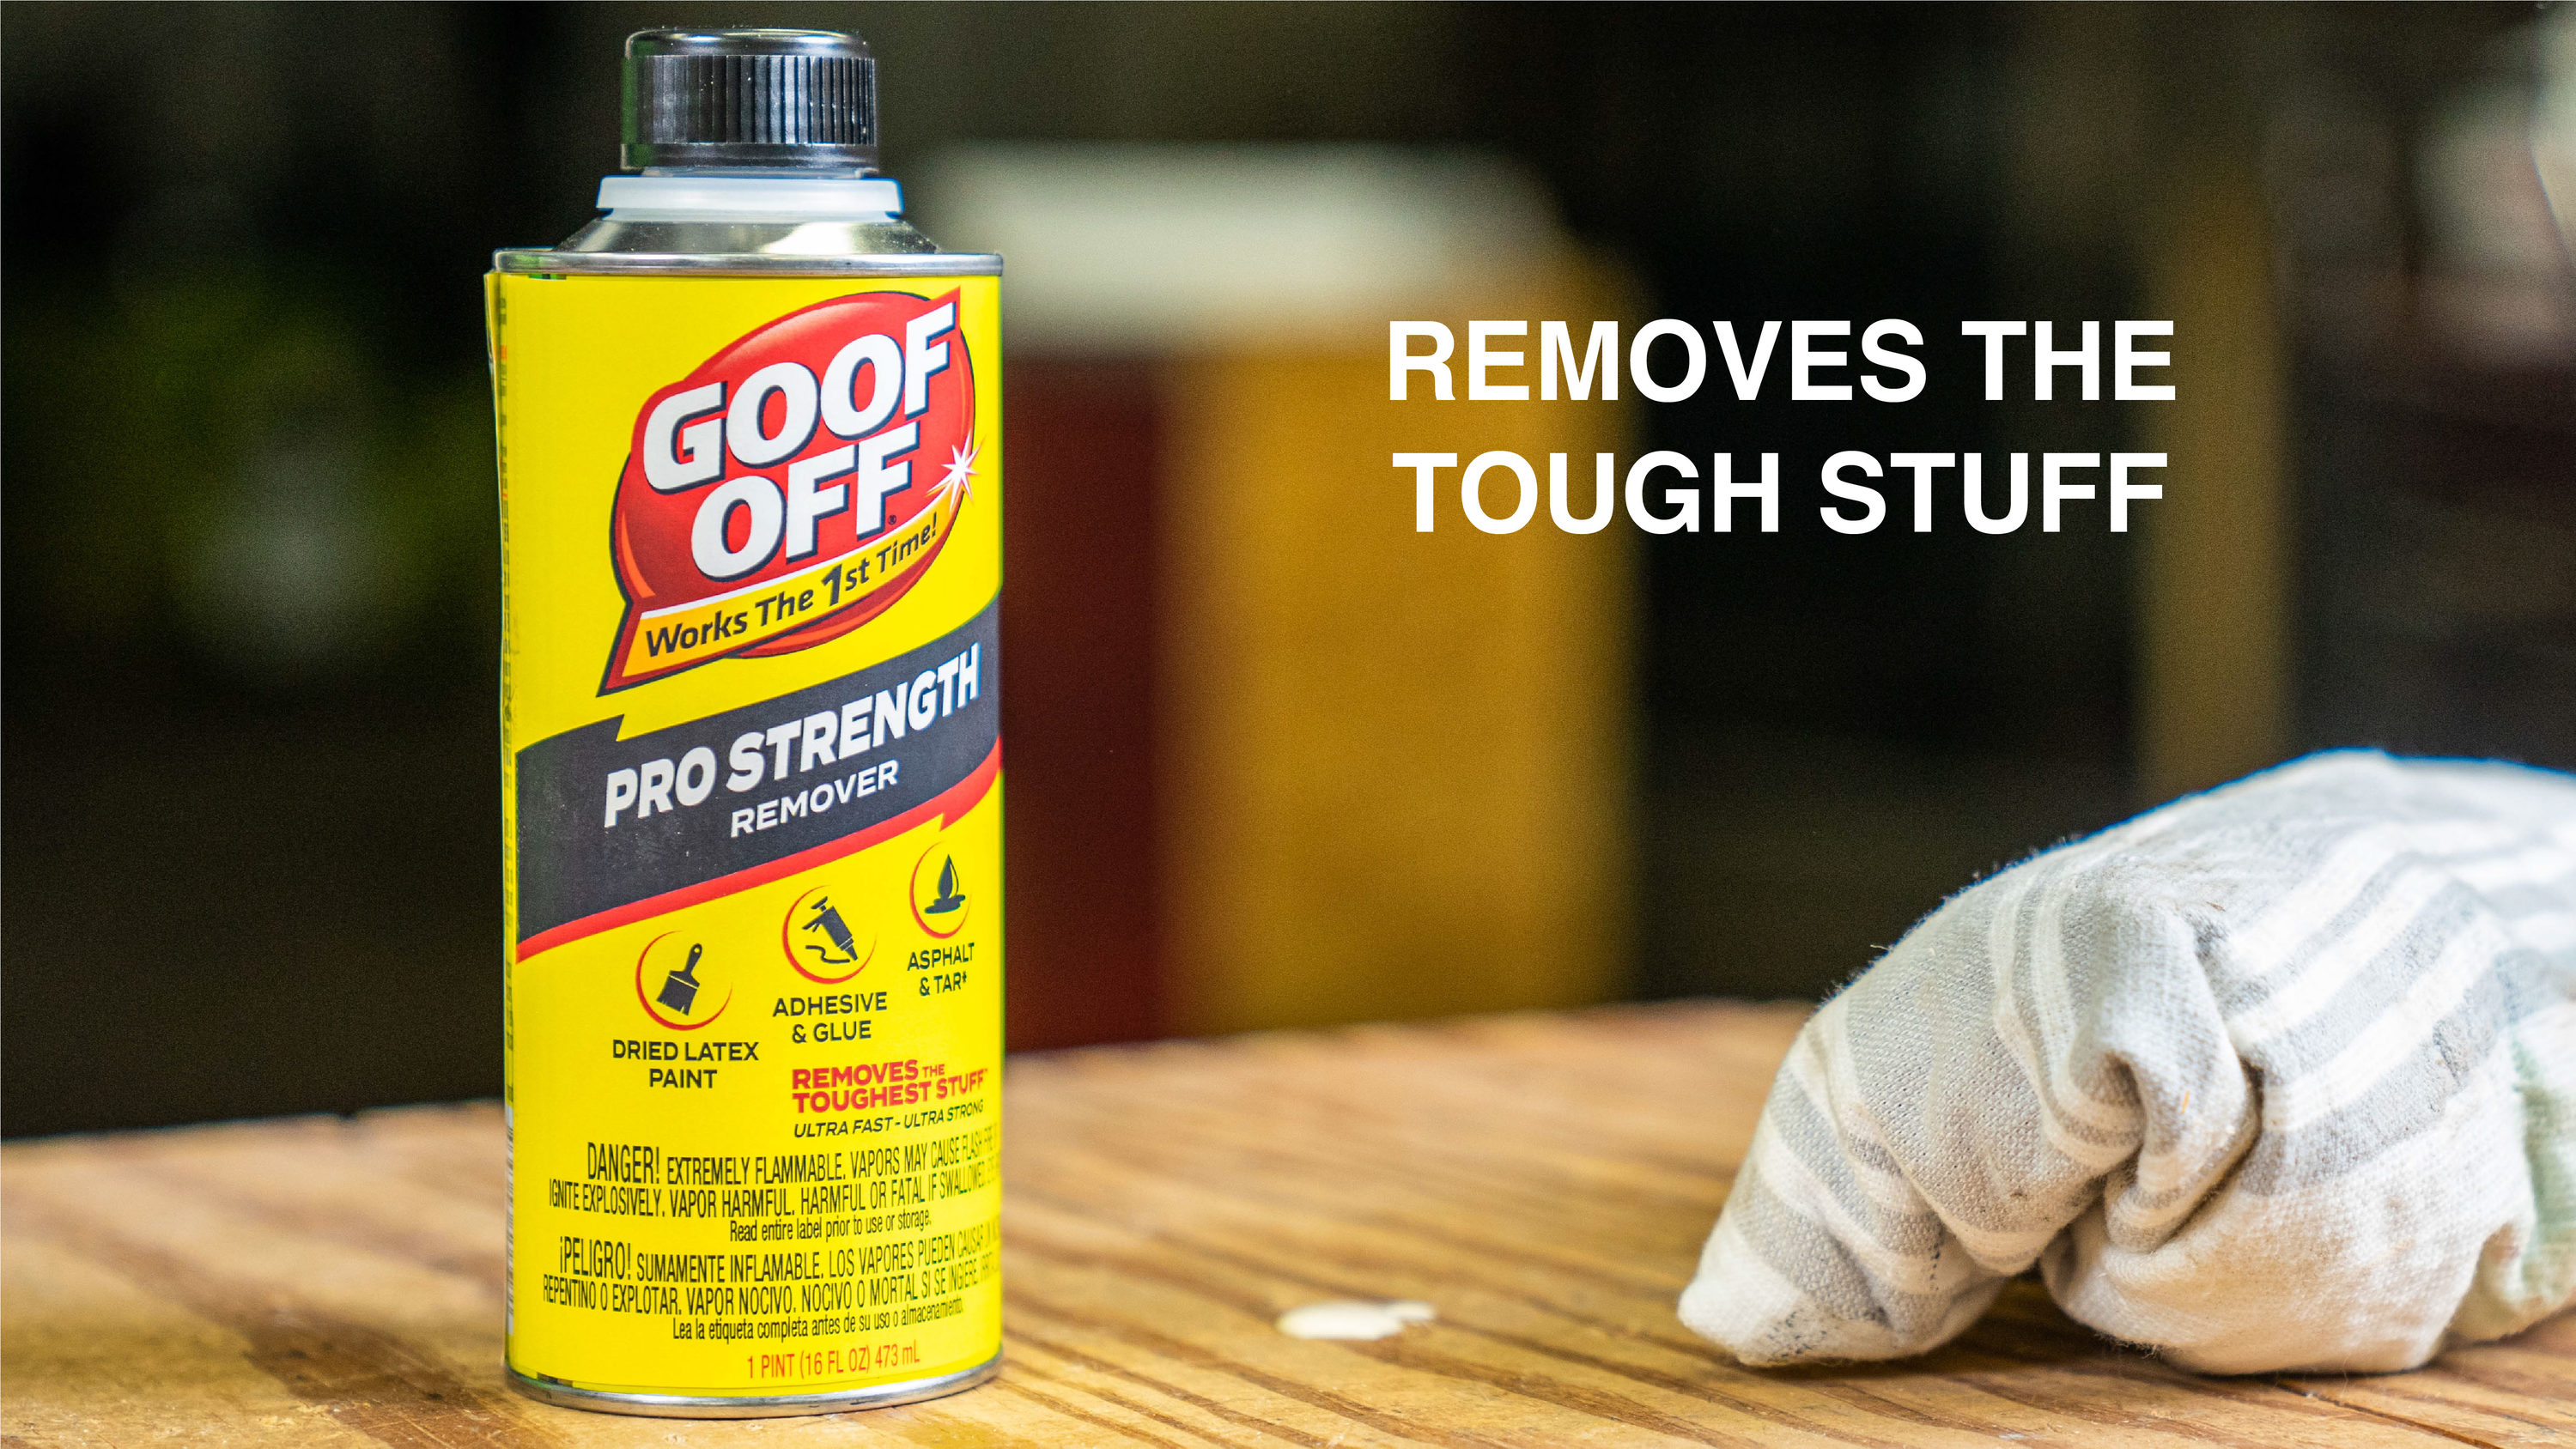 Goo'd Riddance Adhesive Remover - Tape Jungle